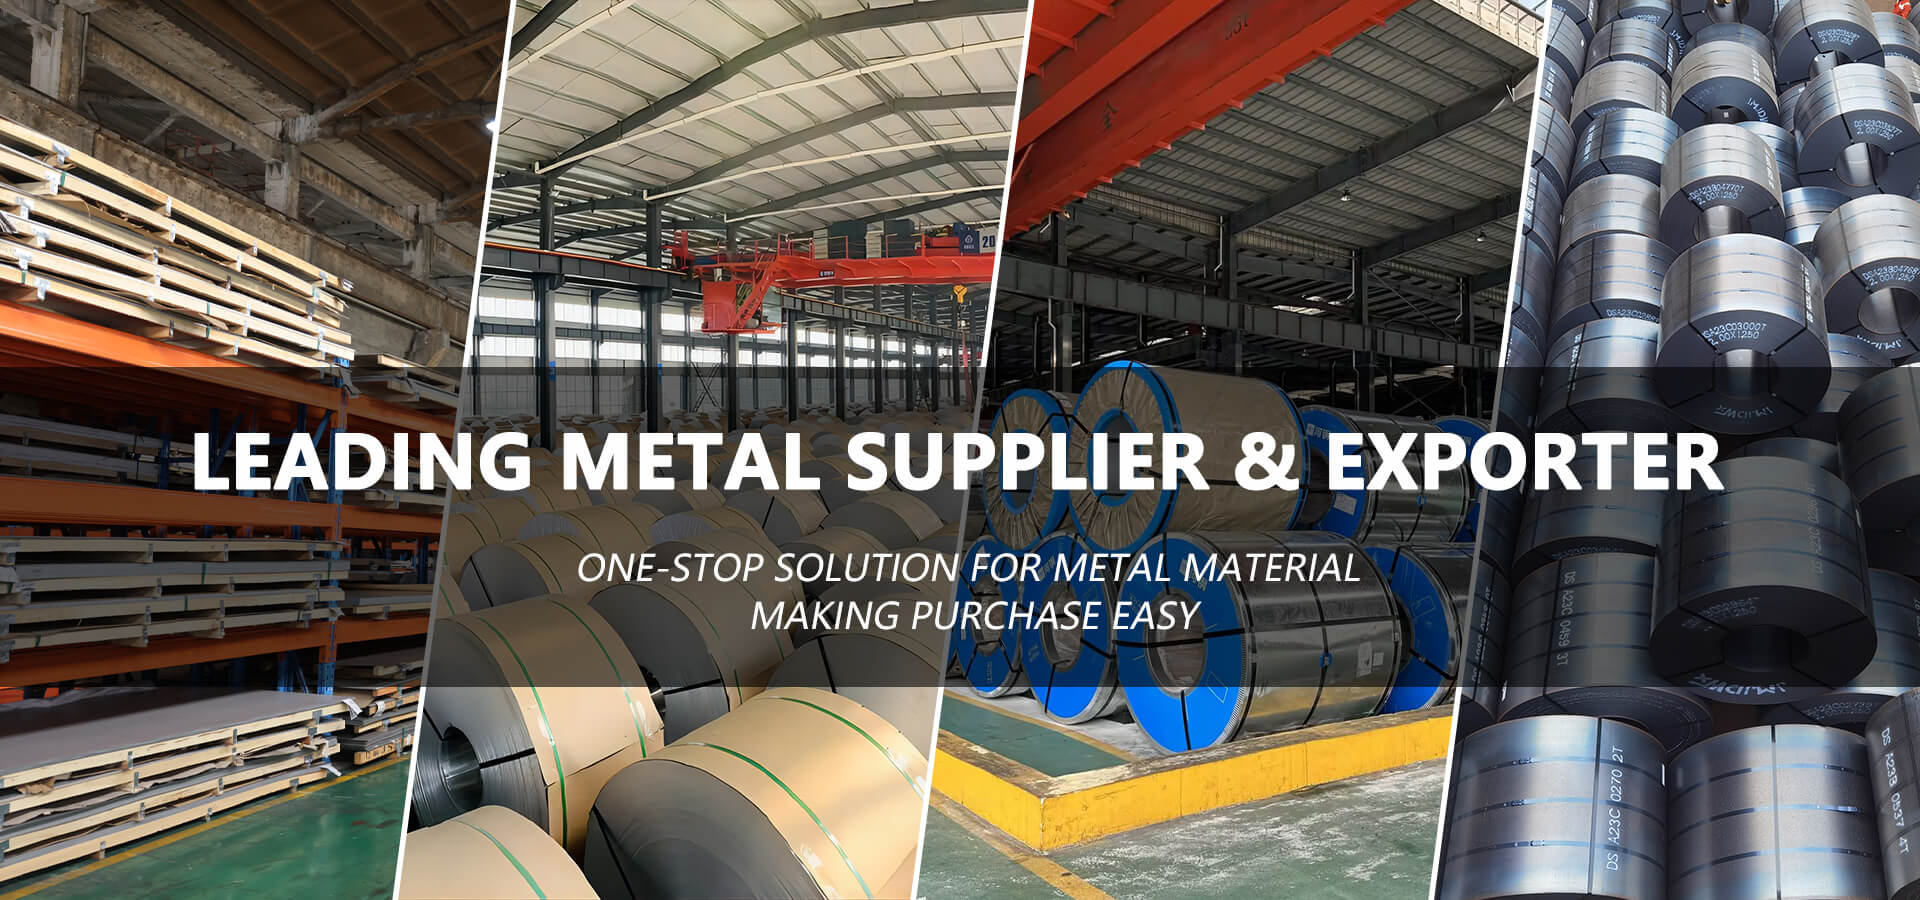 JMJDWX - One-Stop Solution For Metal Material